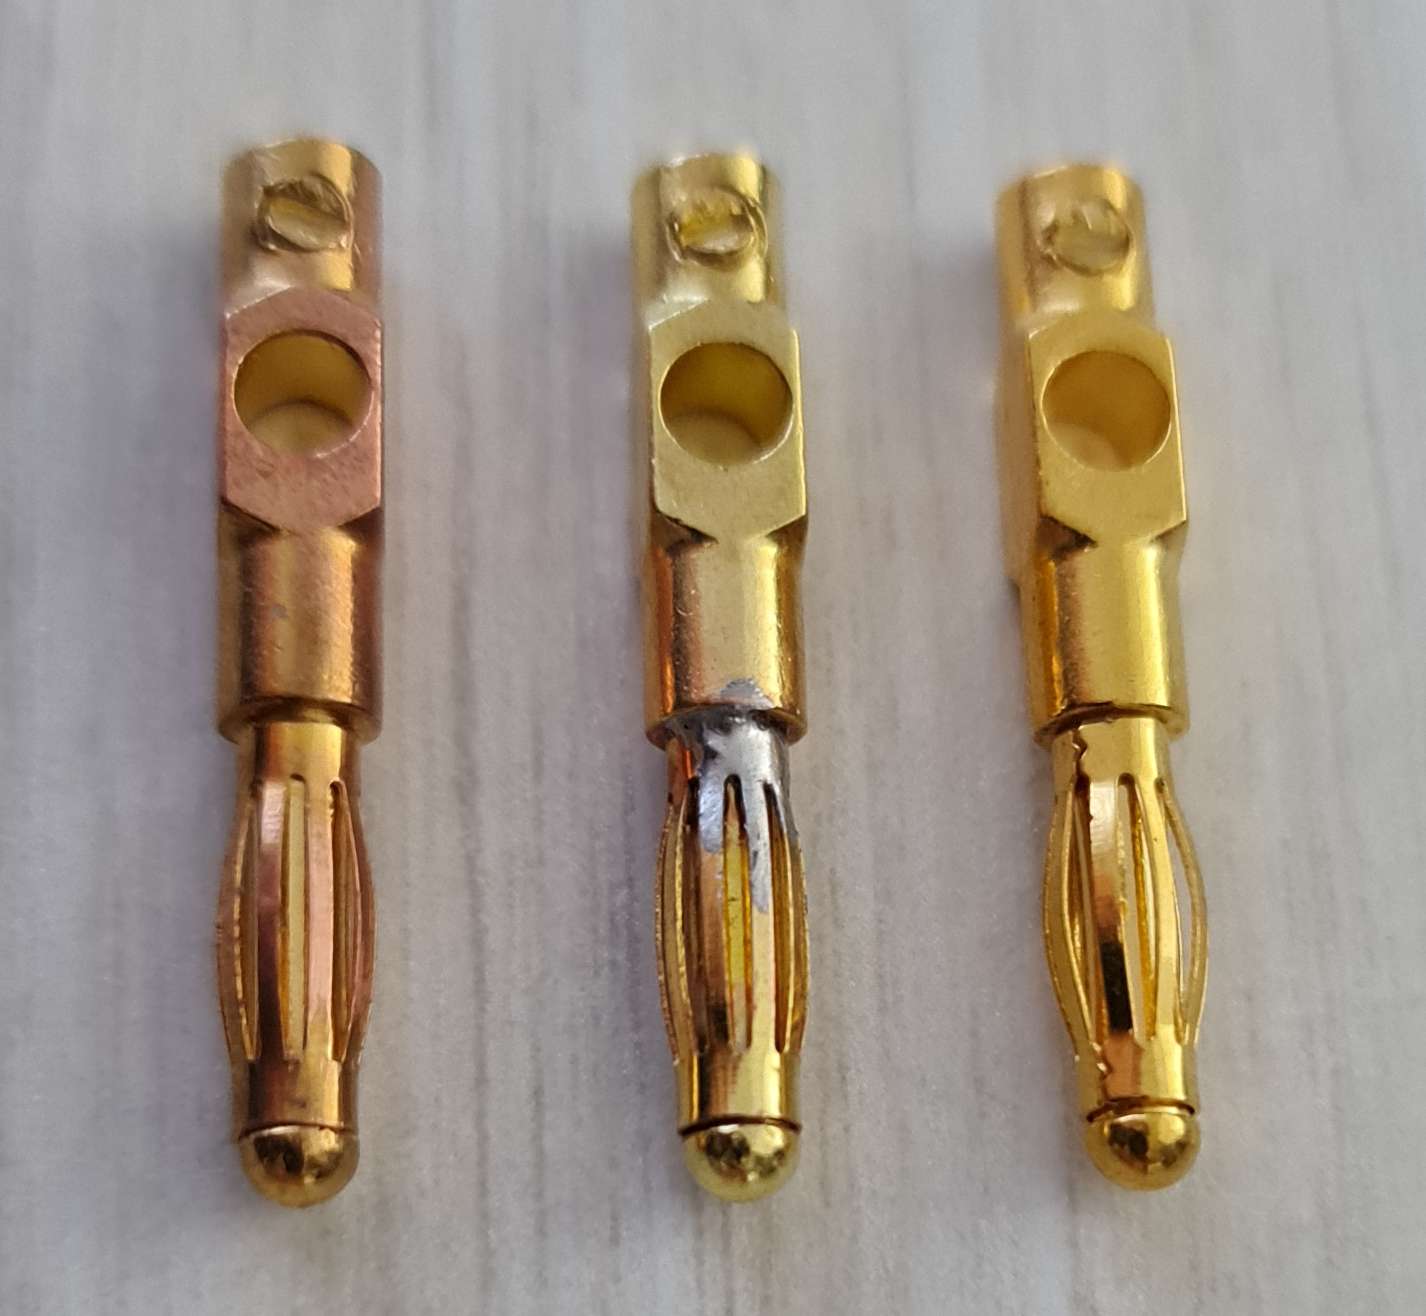 Gold-plated plug in various states